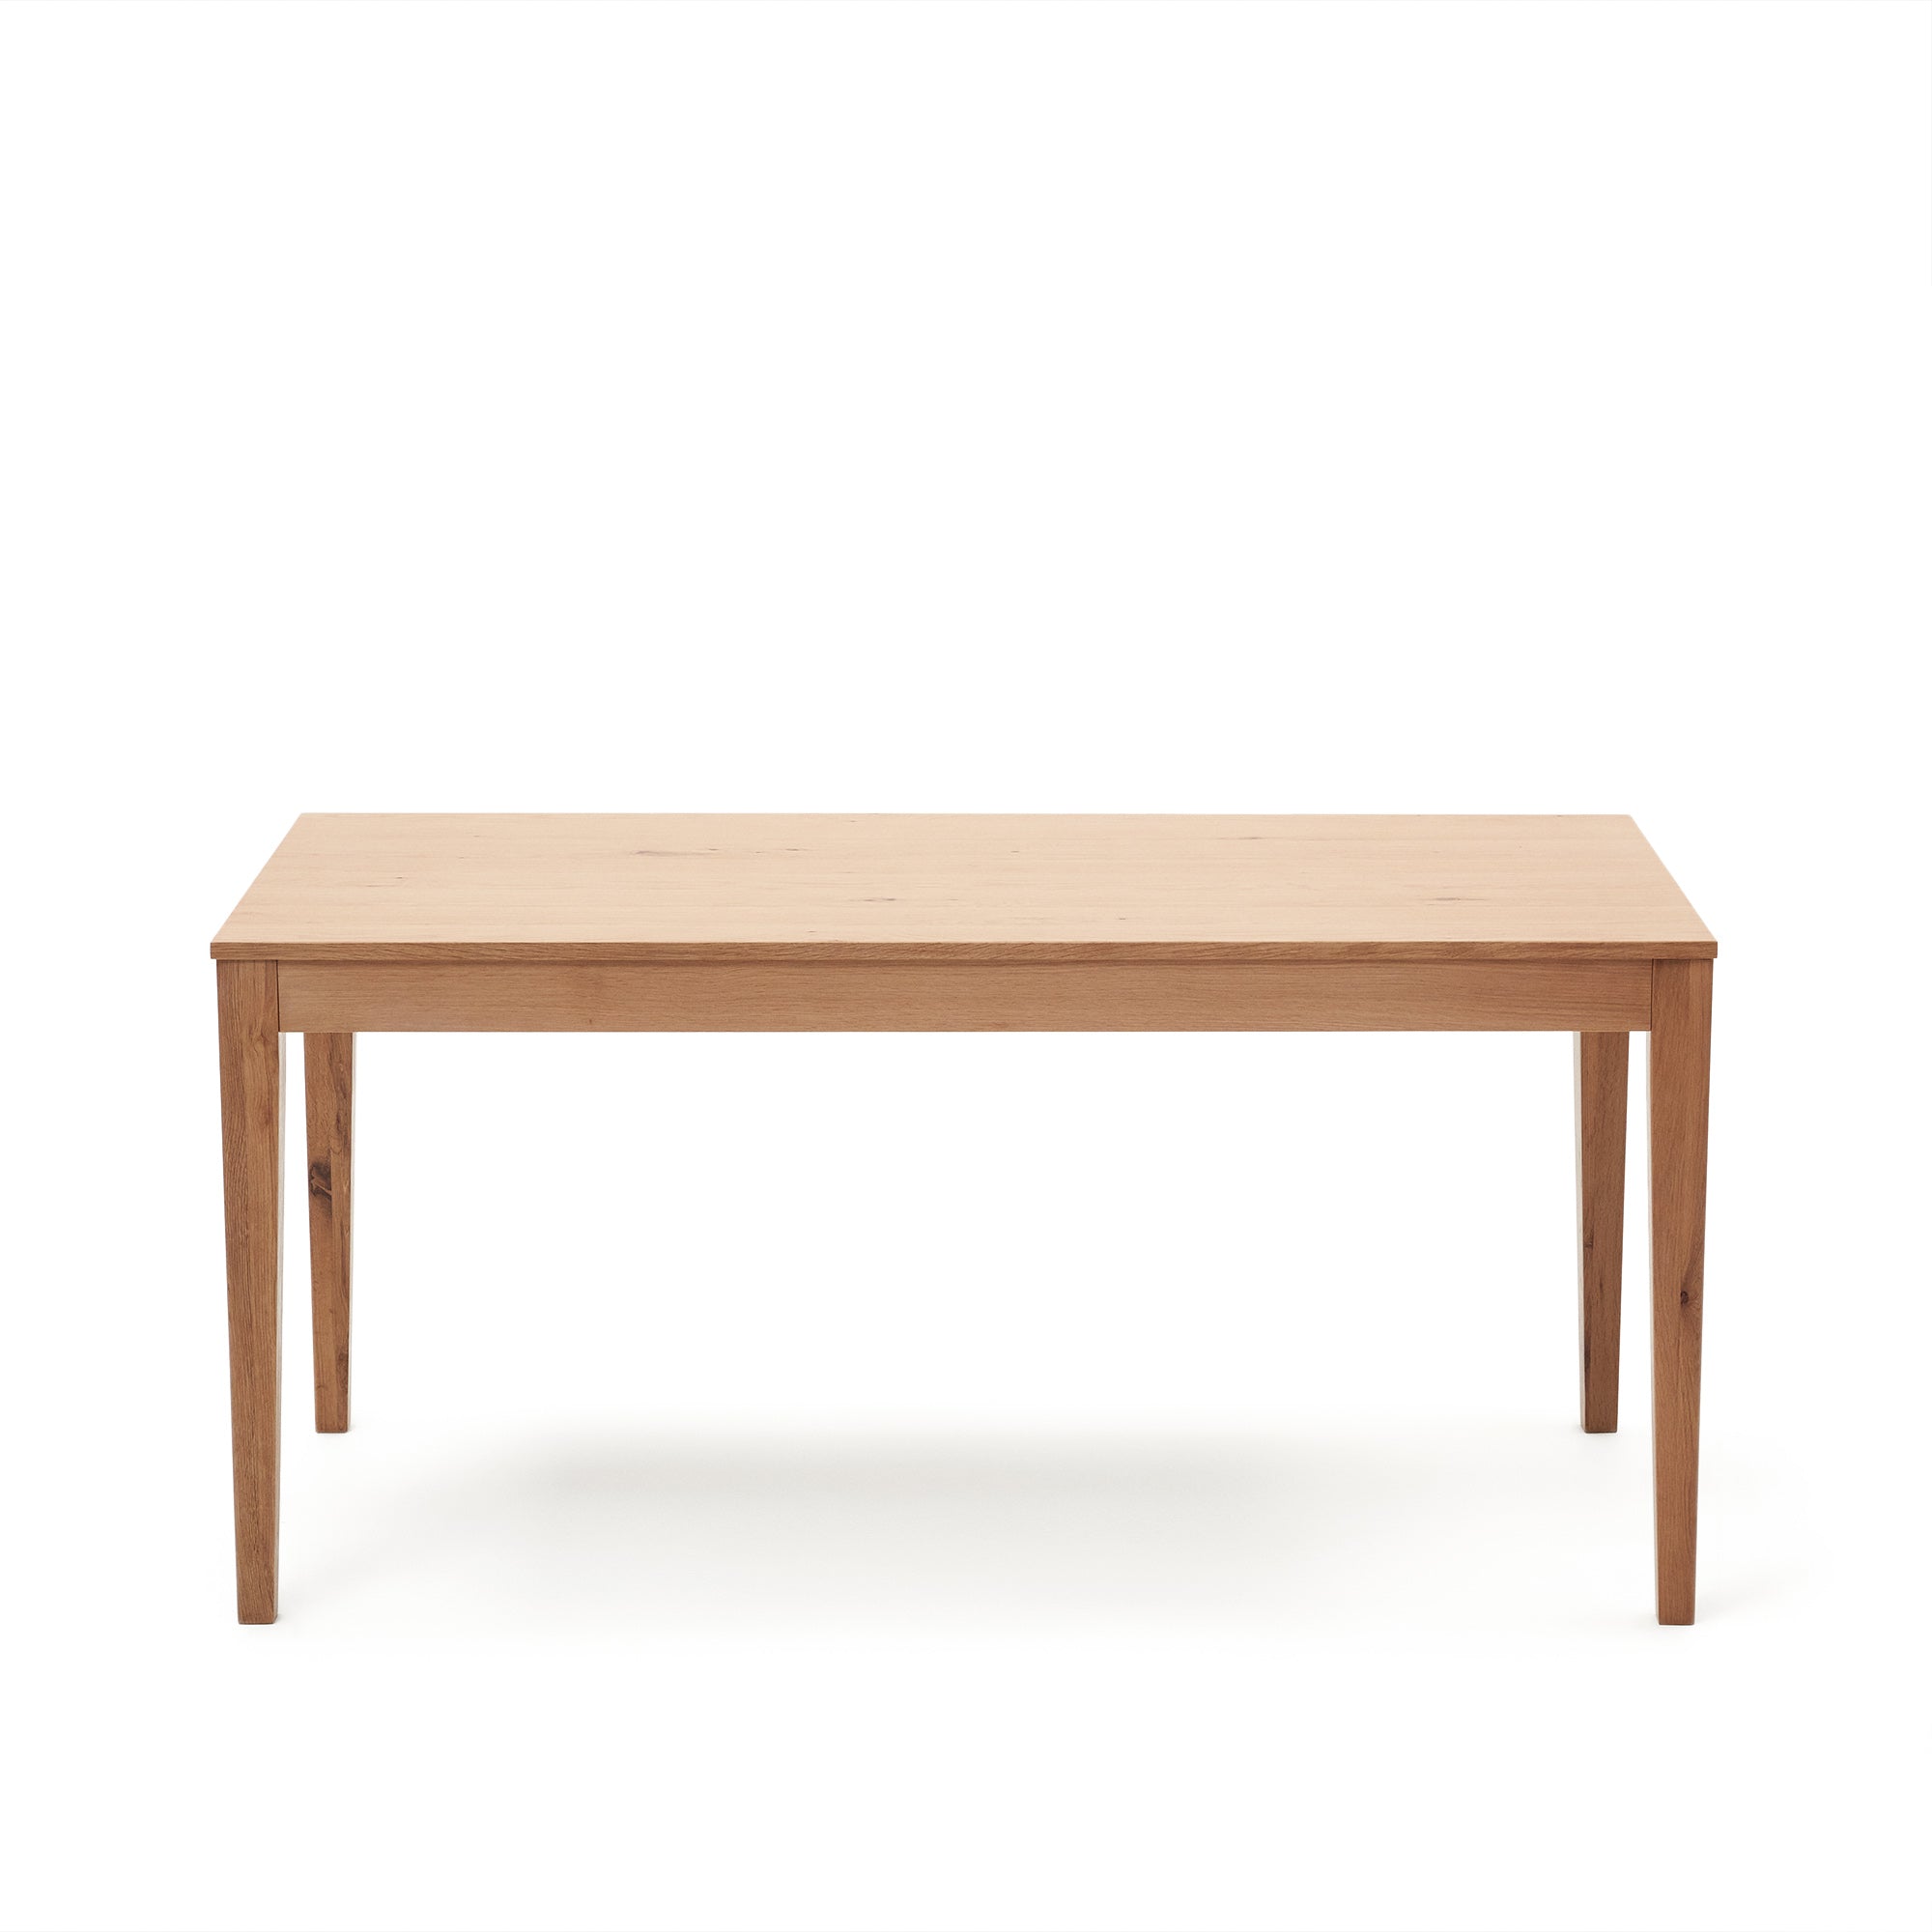 Yain extendable table with oak veneer and solid oak, 160 (220) x 80 cm